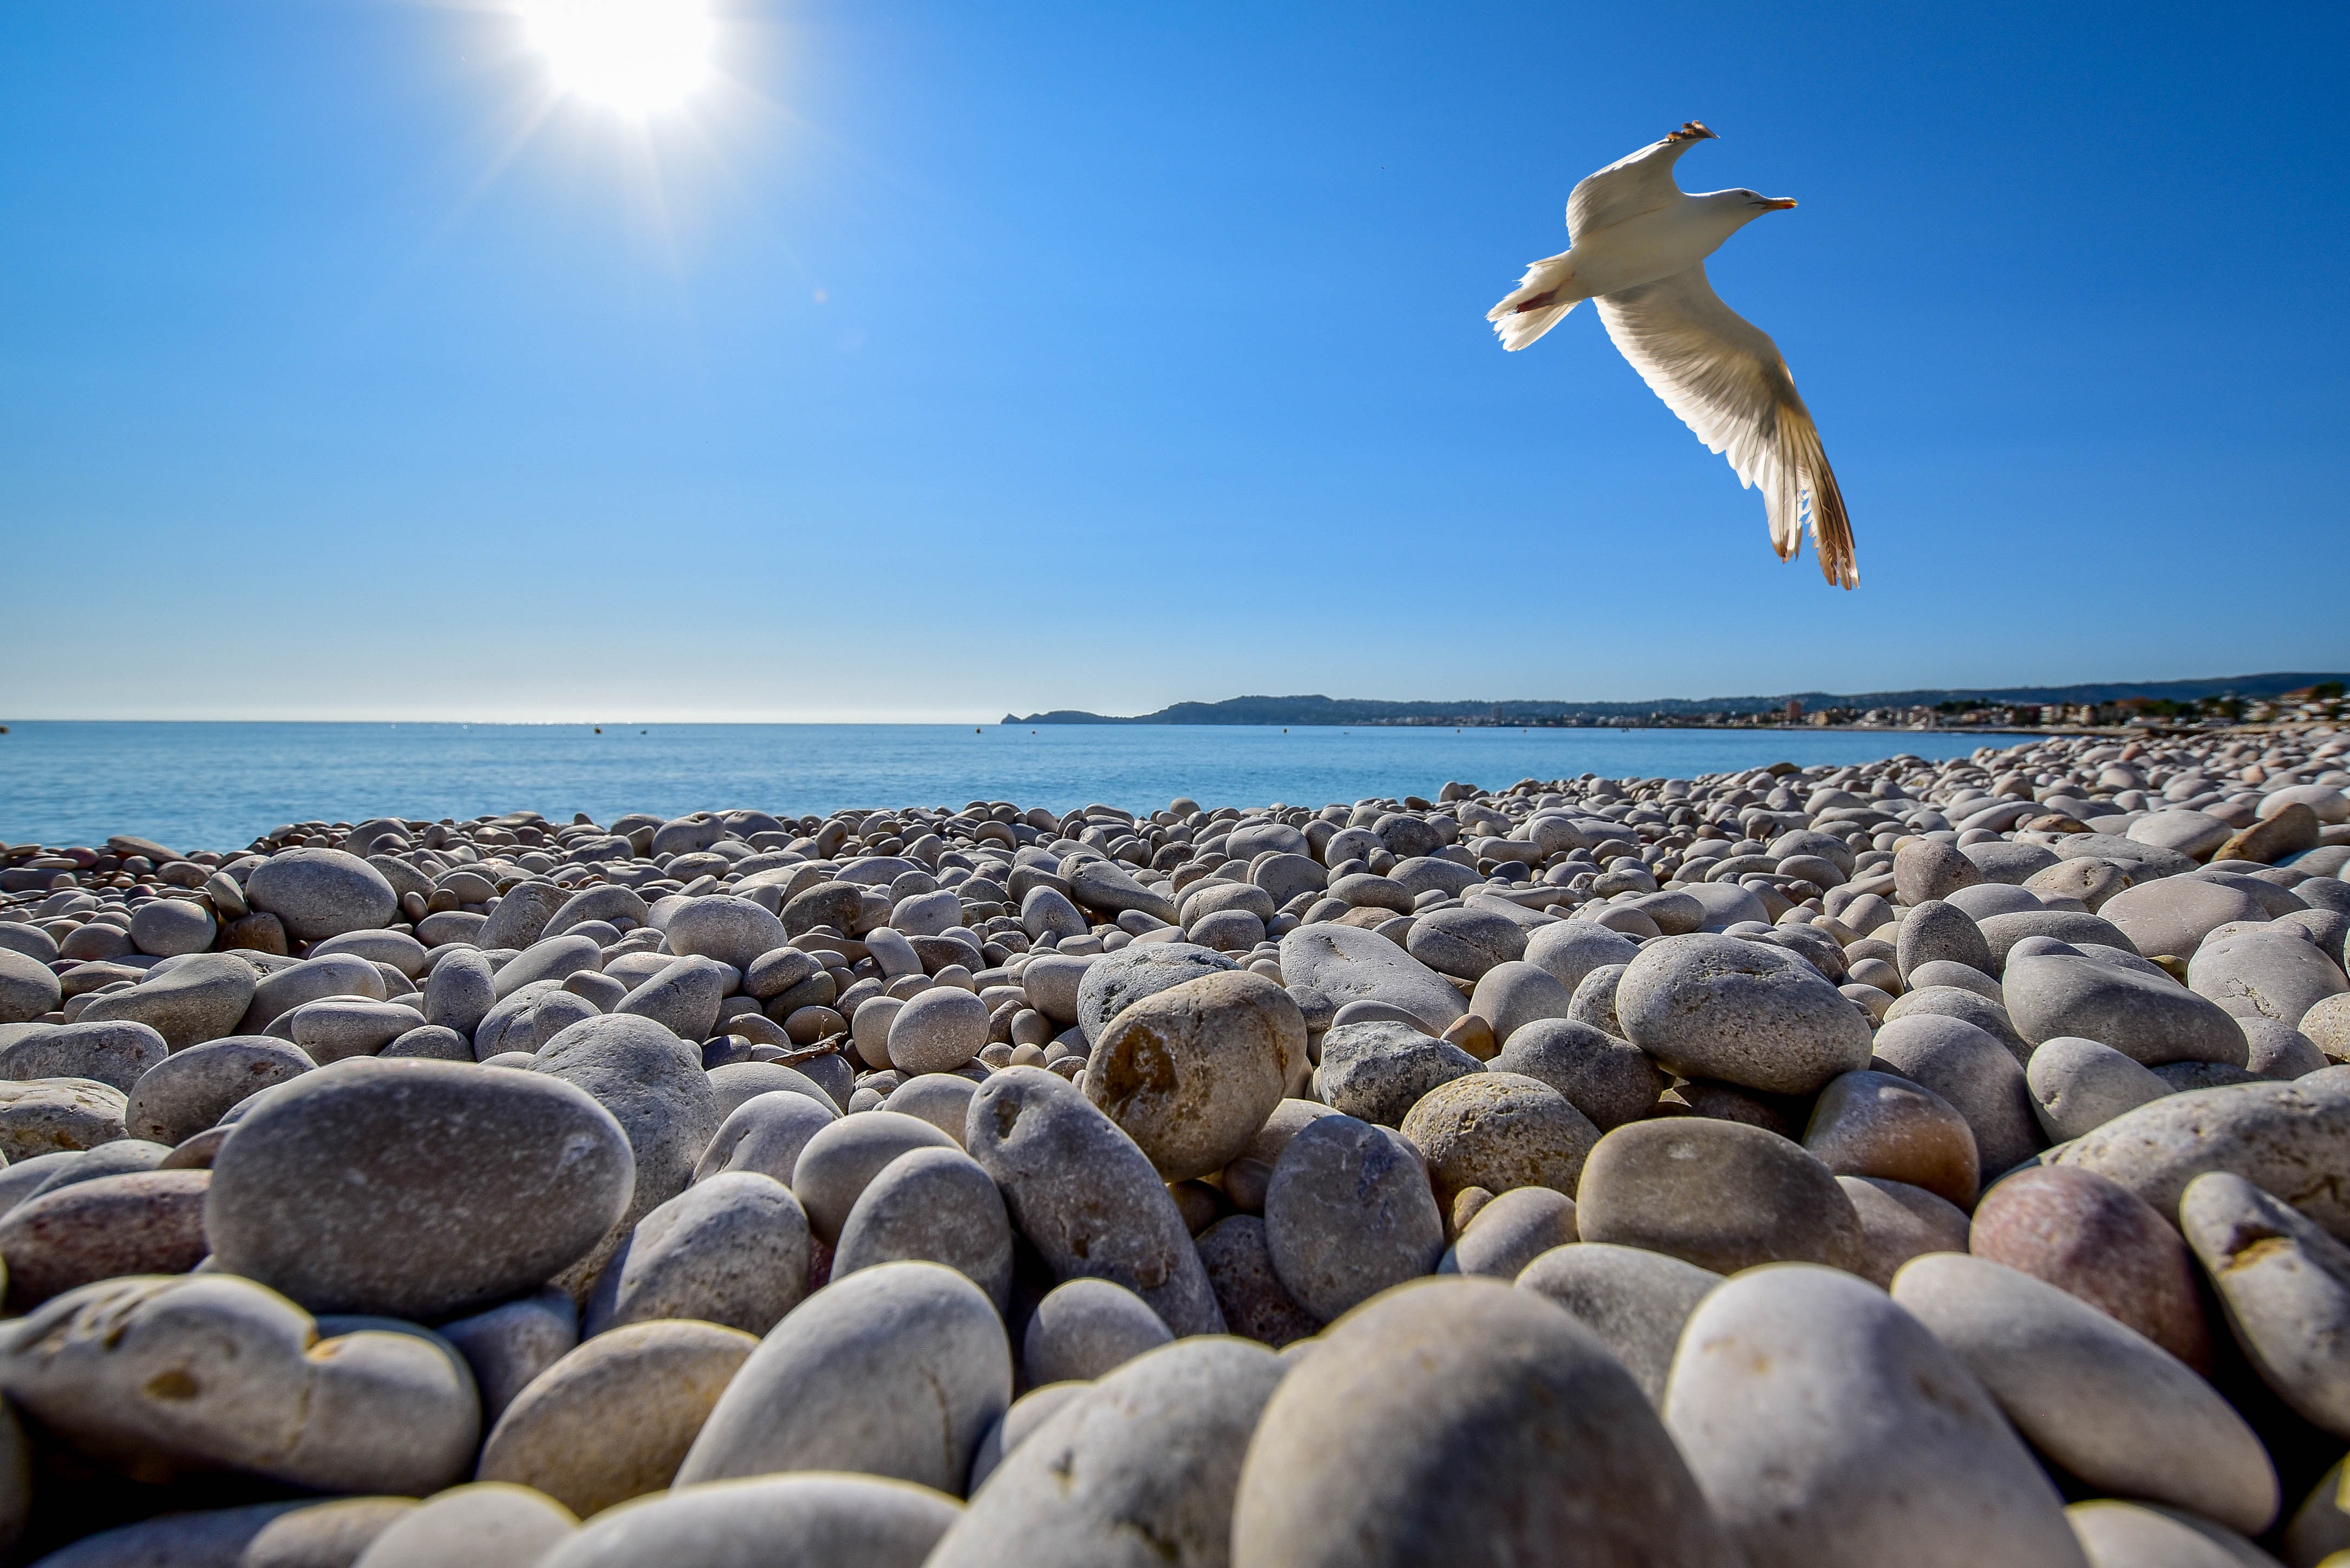 Seagull soaring on top of pebble field at beach photo